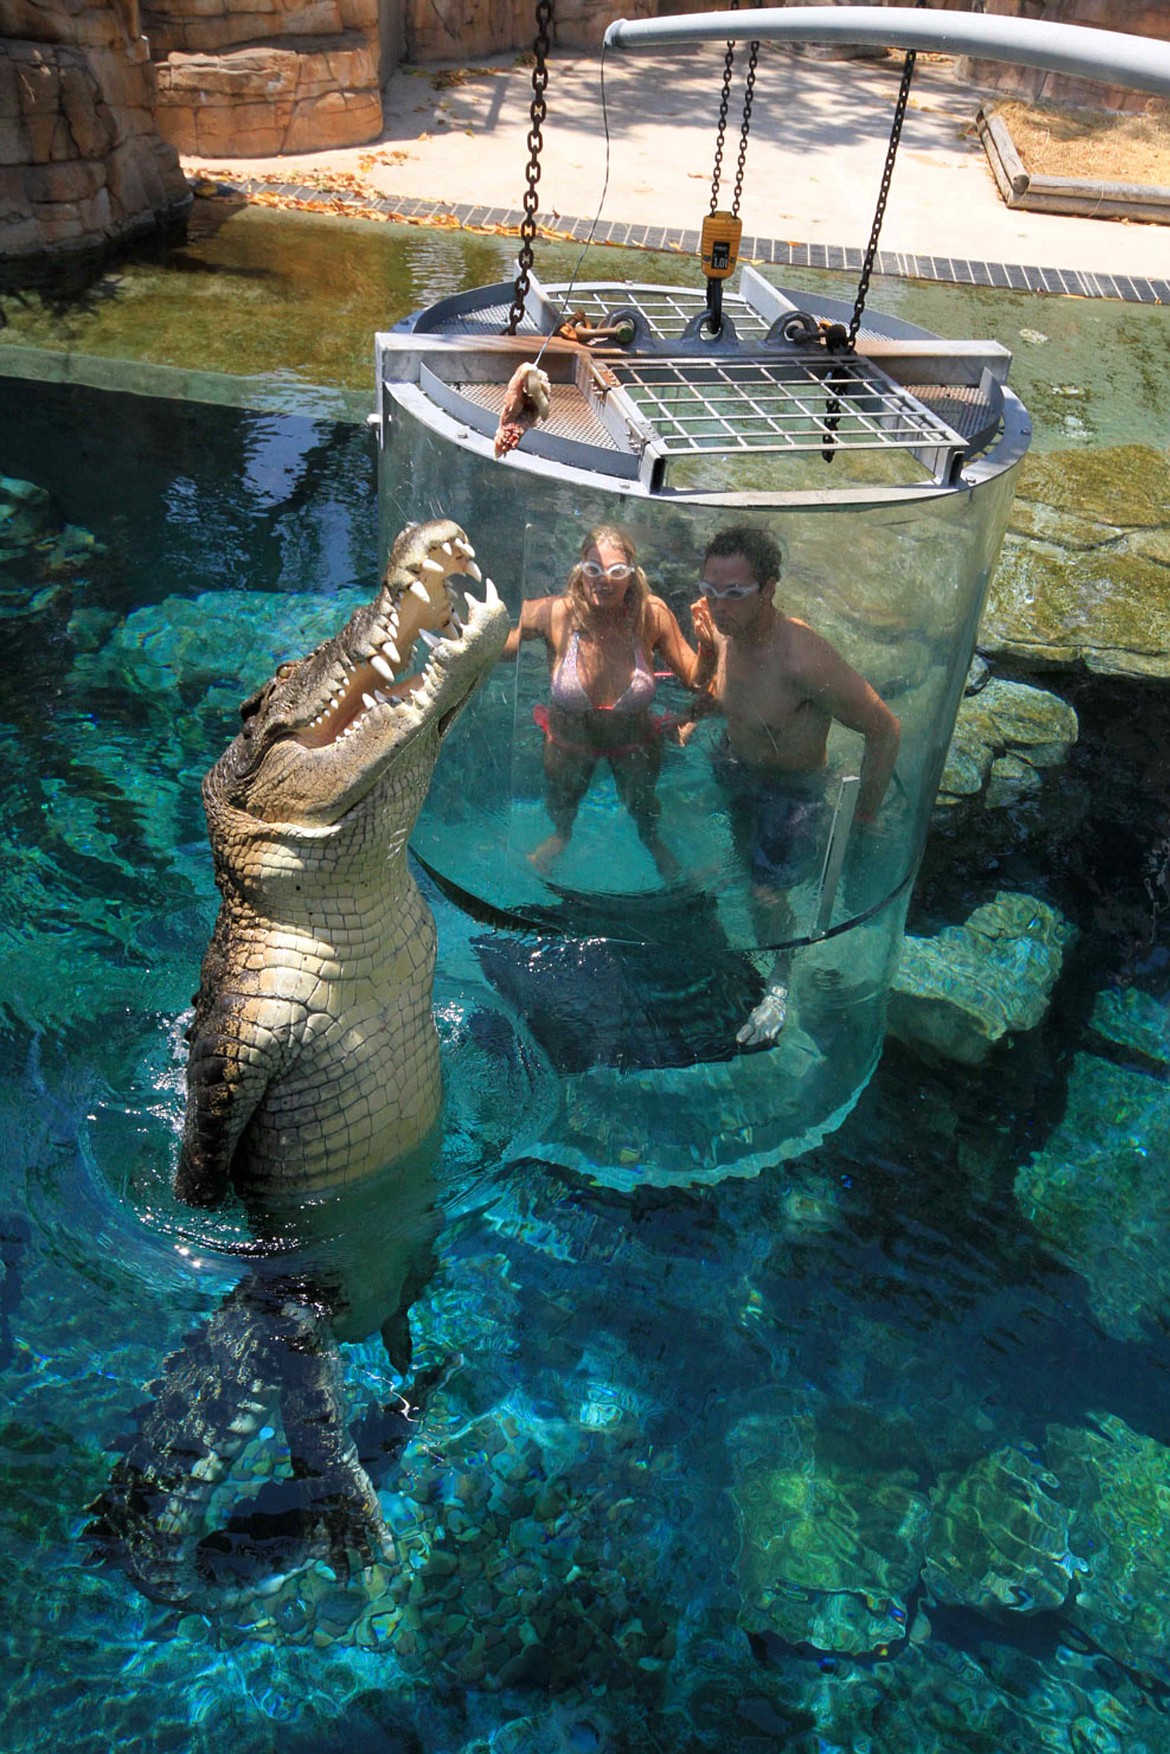 Saltwater crocodile viewing from “Cage of Death” tourist attraction in Darwin, Australia.